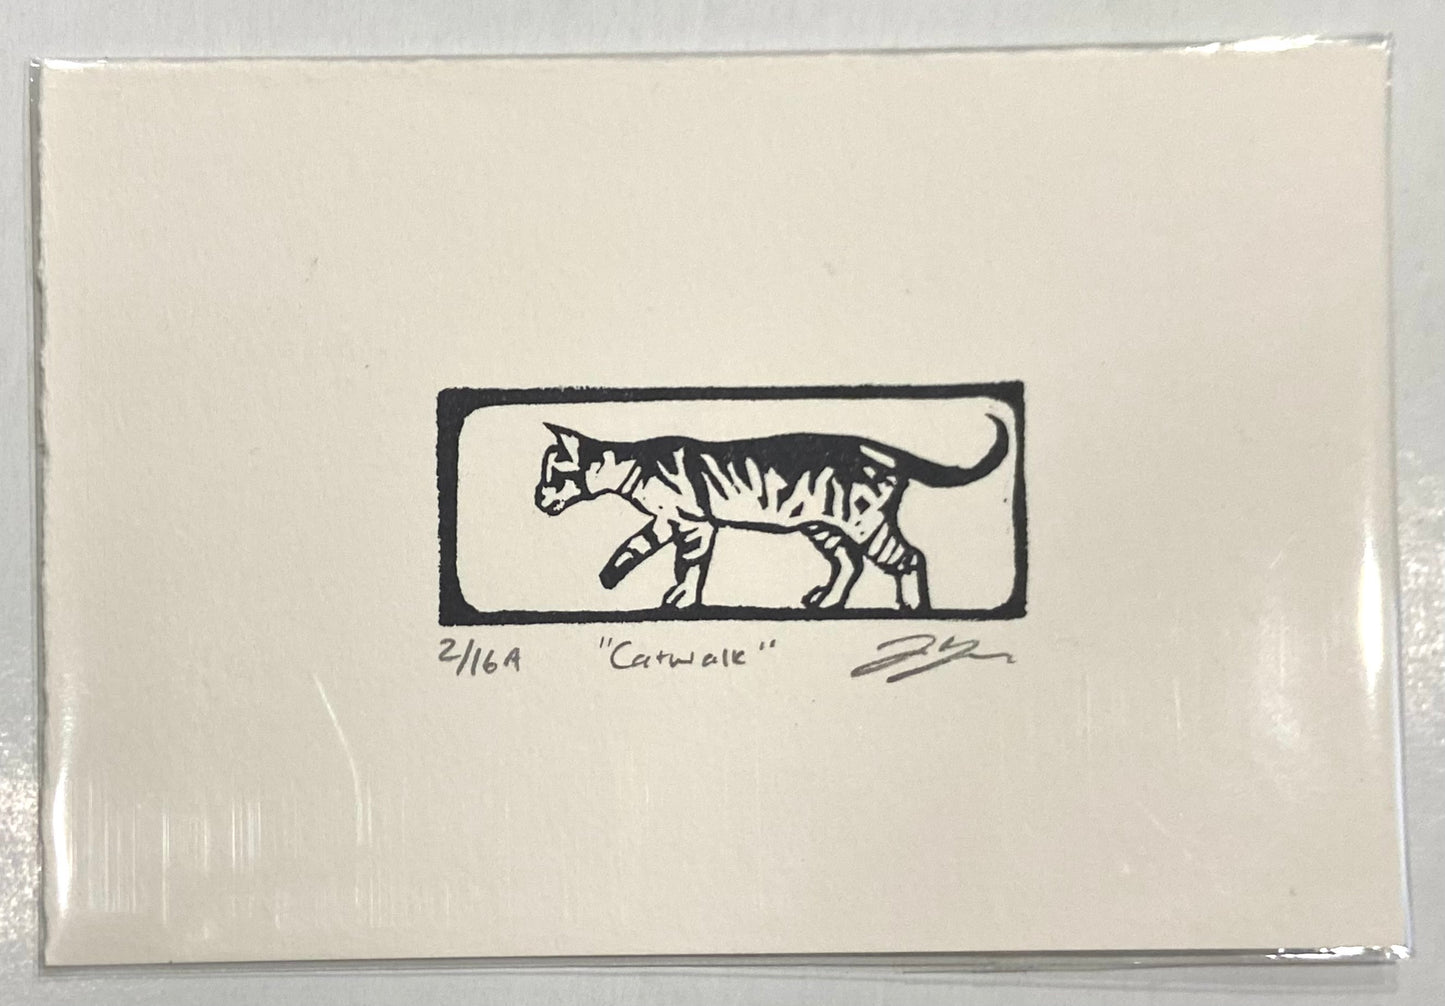 A black and white relief print of a striped cat walking from right to left, visually enclosed by a box. The prints are made by hand with a carved eraser and numbered, titled and signed.